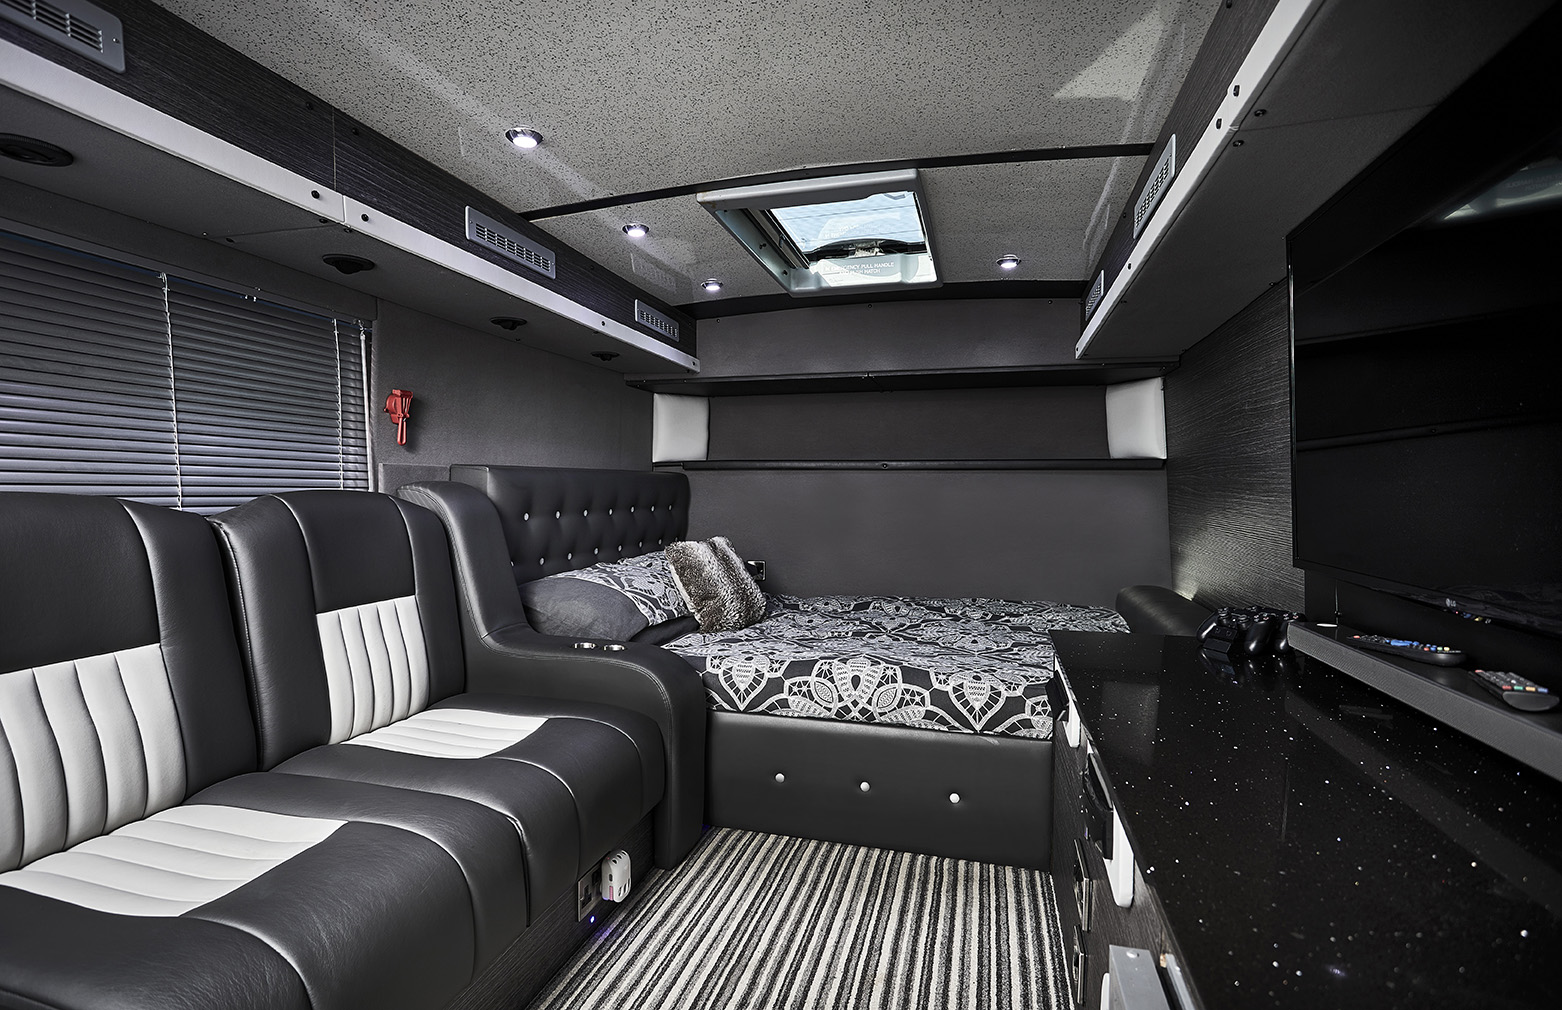 On-board our UK sleeper buses, inside the star sleeper bus private room for the artist. Double bed with plush seating area and HD TV. 